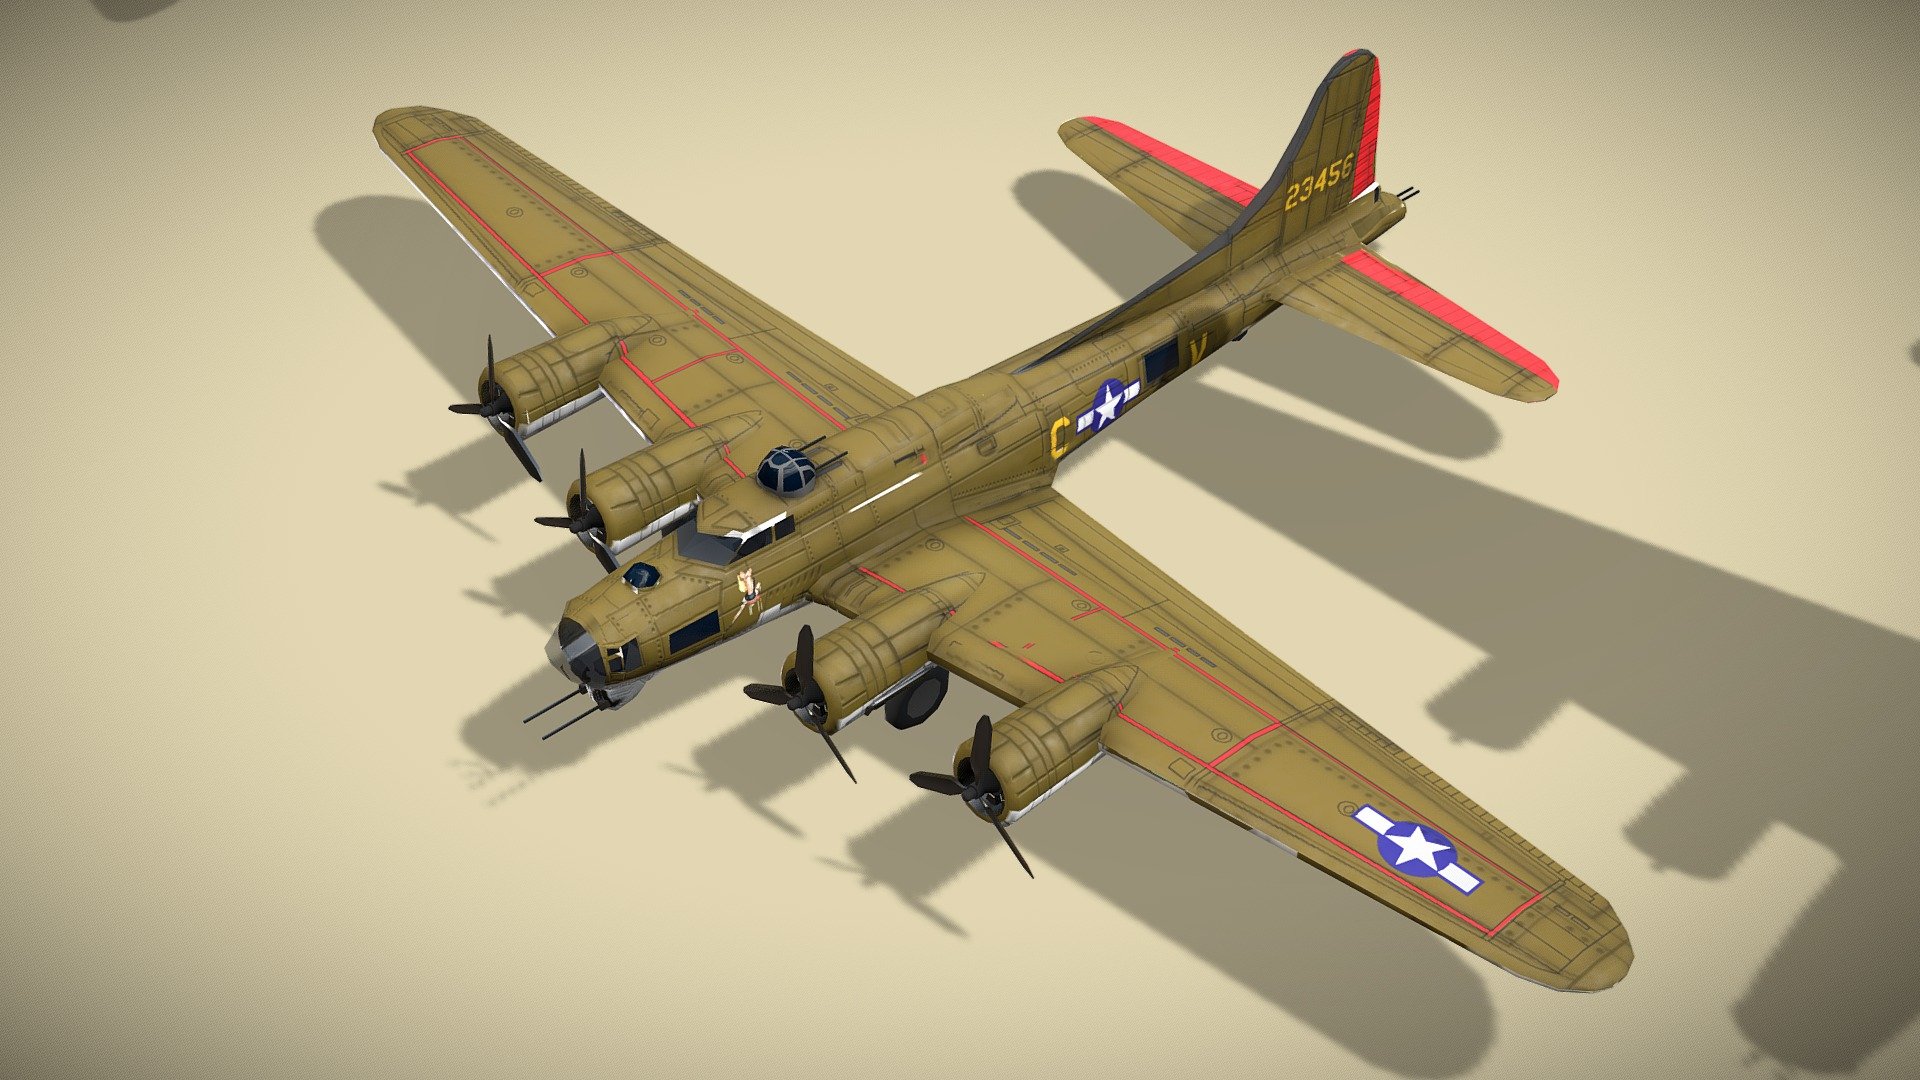 Boeing B-17 Flying Fortress

Lowpoly model of american heavy bomber



Boeing B-17 Flying Fortress is a four-engined heavy bomber developed in the 1930s for the United States Army Air Corps. Competing against Douglas and Martin for a contract to build 200 bombers, the Boeing entry outperformed both competitors and exceeded the Air Corps' performance specifications. Although Boeing lost the contract (to the Douglas B-18 Bolo) because the prototype crashed, the Air Corps ordered 13 more B-17s for further evaluation. From its introduction in 1938, the B-17 Flying Fortress become the third-most produced bomber of all time, behind the four-engined Consolidated B-24 Liberator and the multirole, twin-engined Junkers Ju 88.



1 standing version and 2 flying versionsin set

Model has bump map, roughness map and 3 x diffuse textures.



Check also my other aircrafts and cars

Patreon with monthly free model - Boeing B-17 Flying Fortress lowpoly WW2 bomber - Buy Royalty Free 3D model by NETRUNNER_pl 3d model